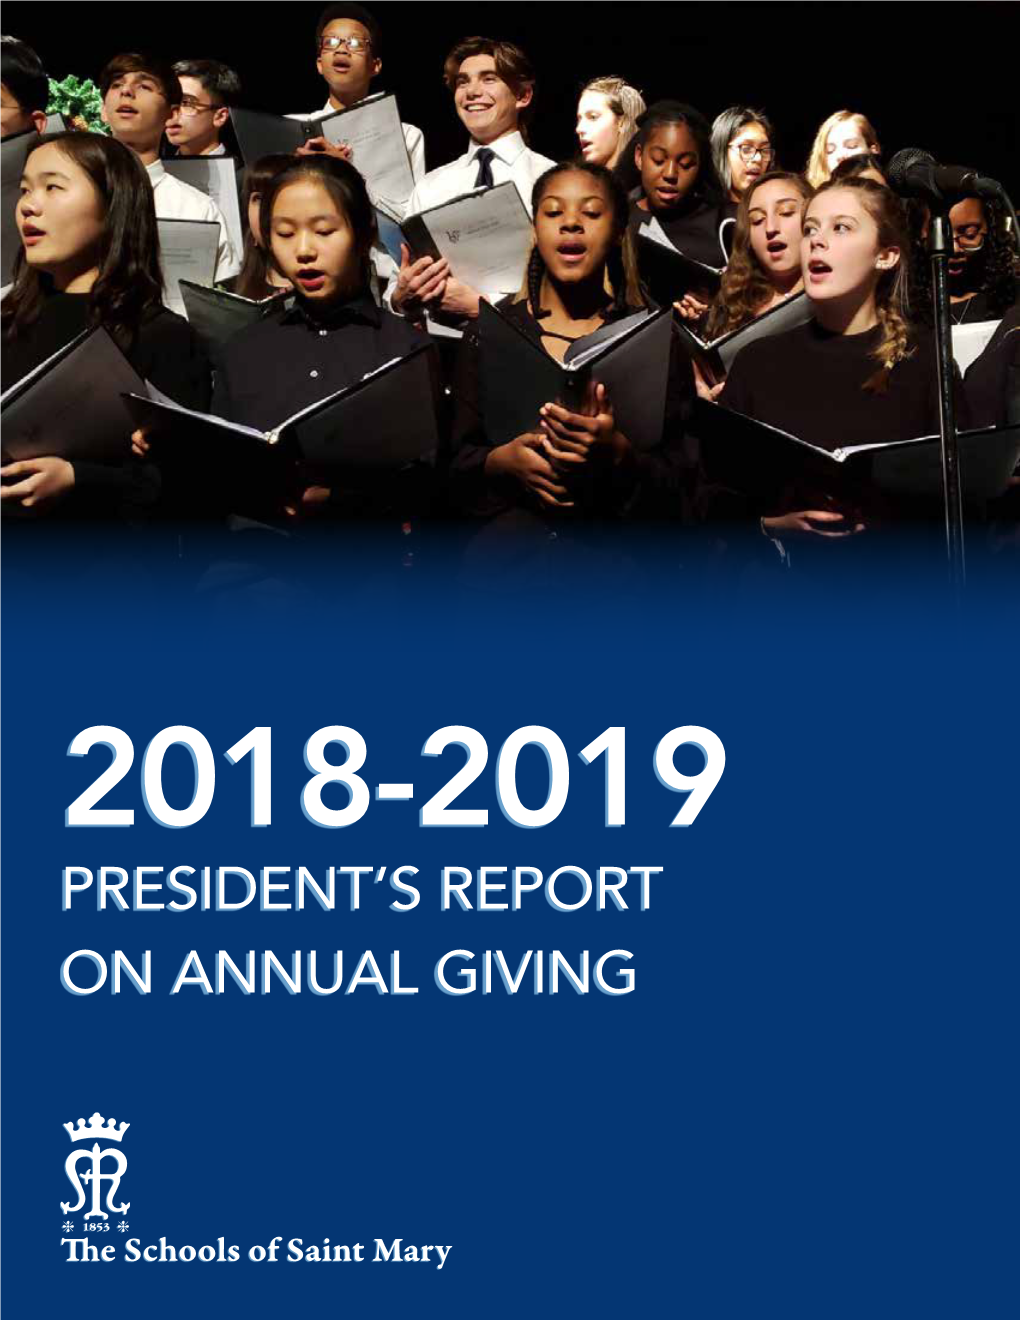 President's Report on Annual Giving